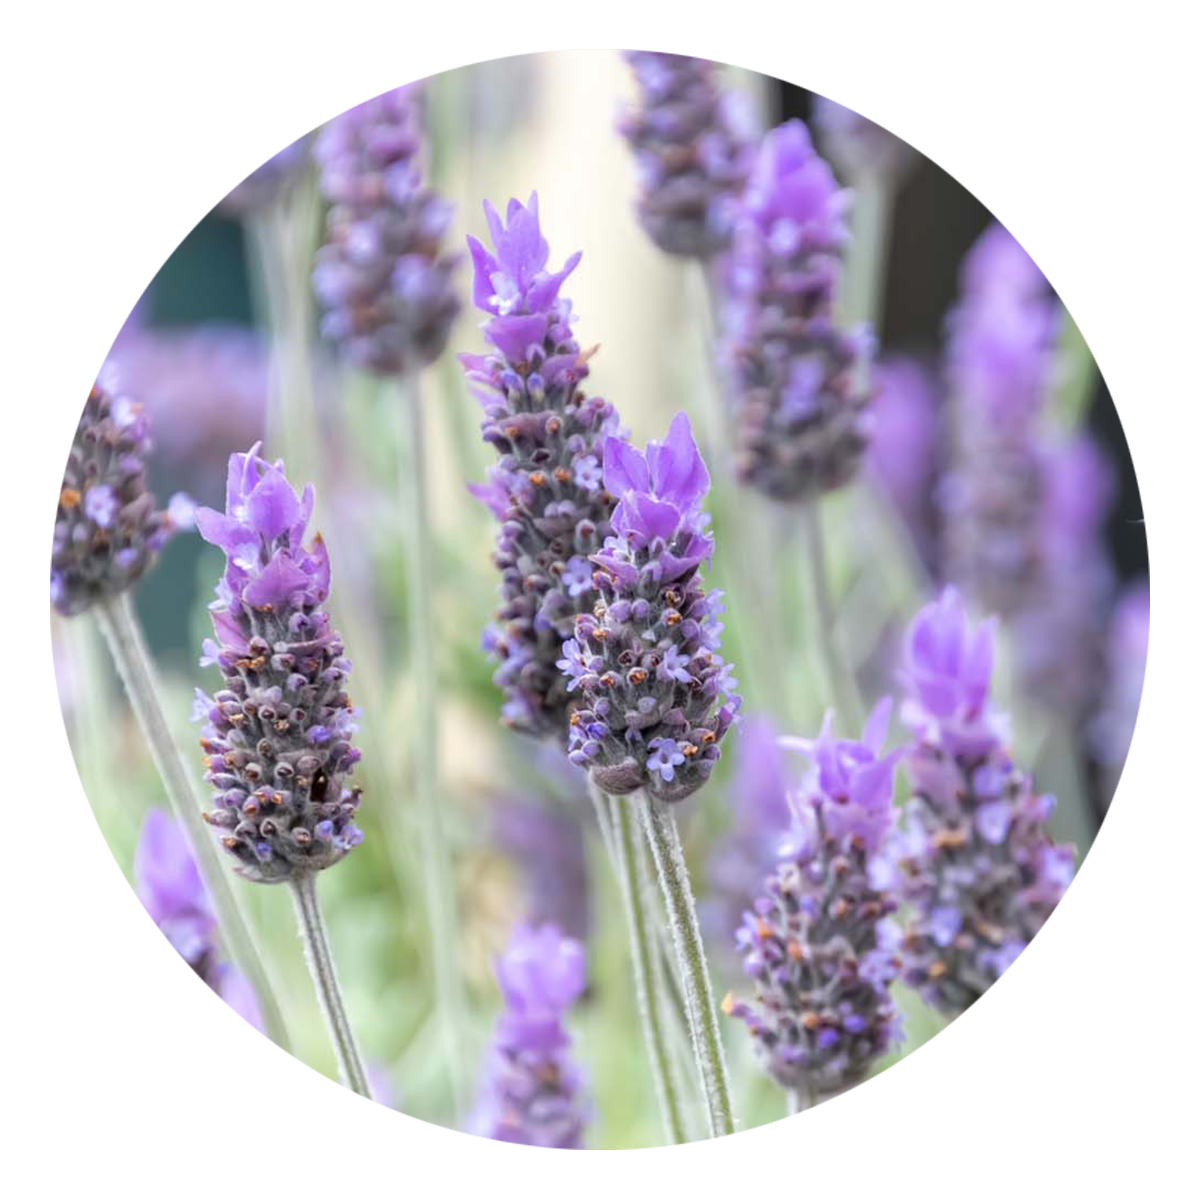 View Here: Lavender flower